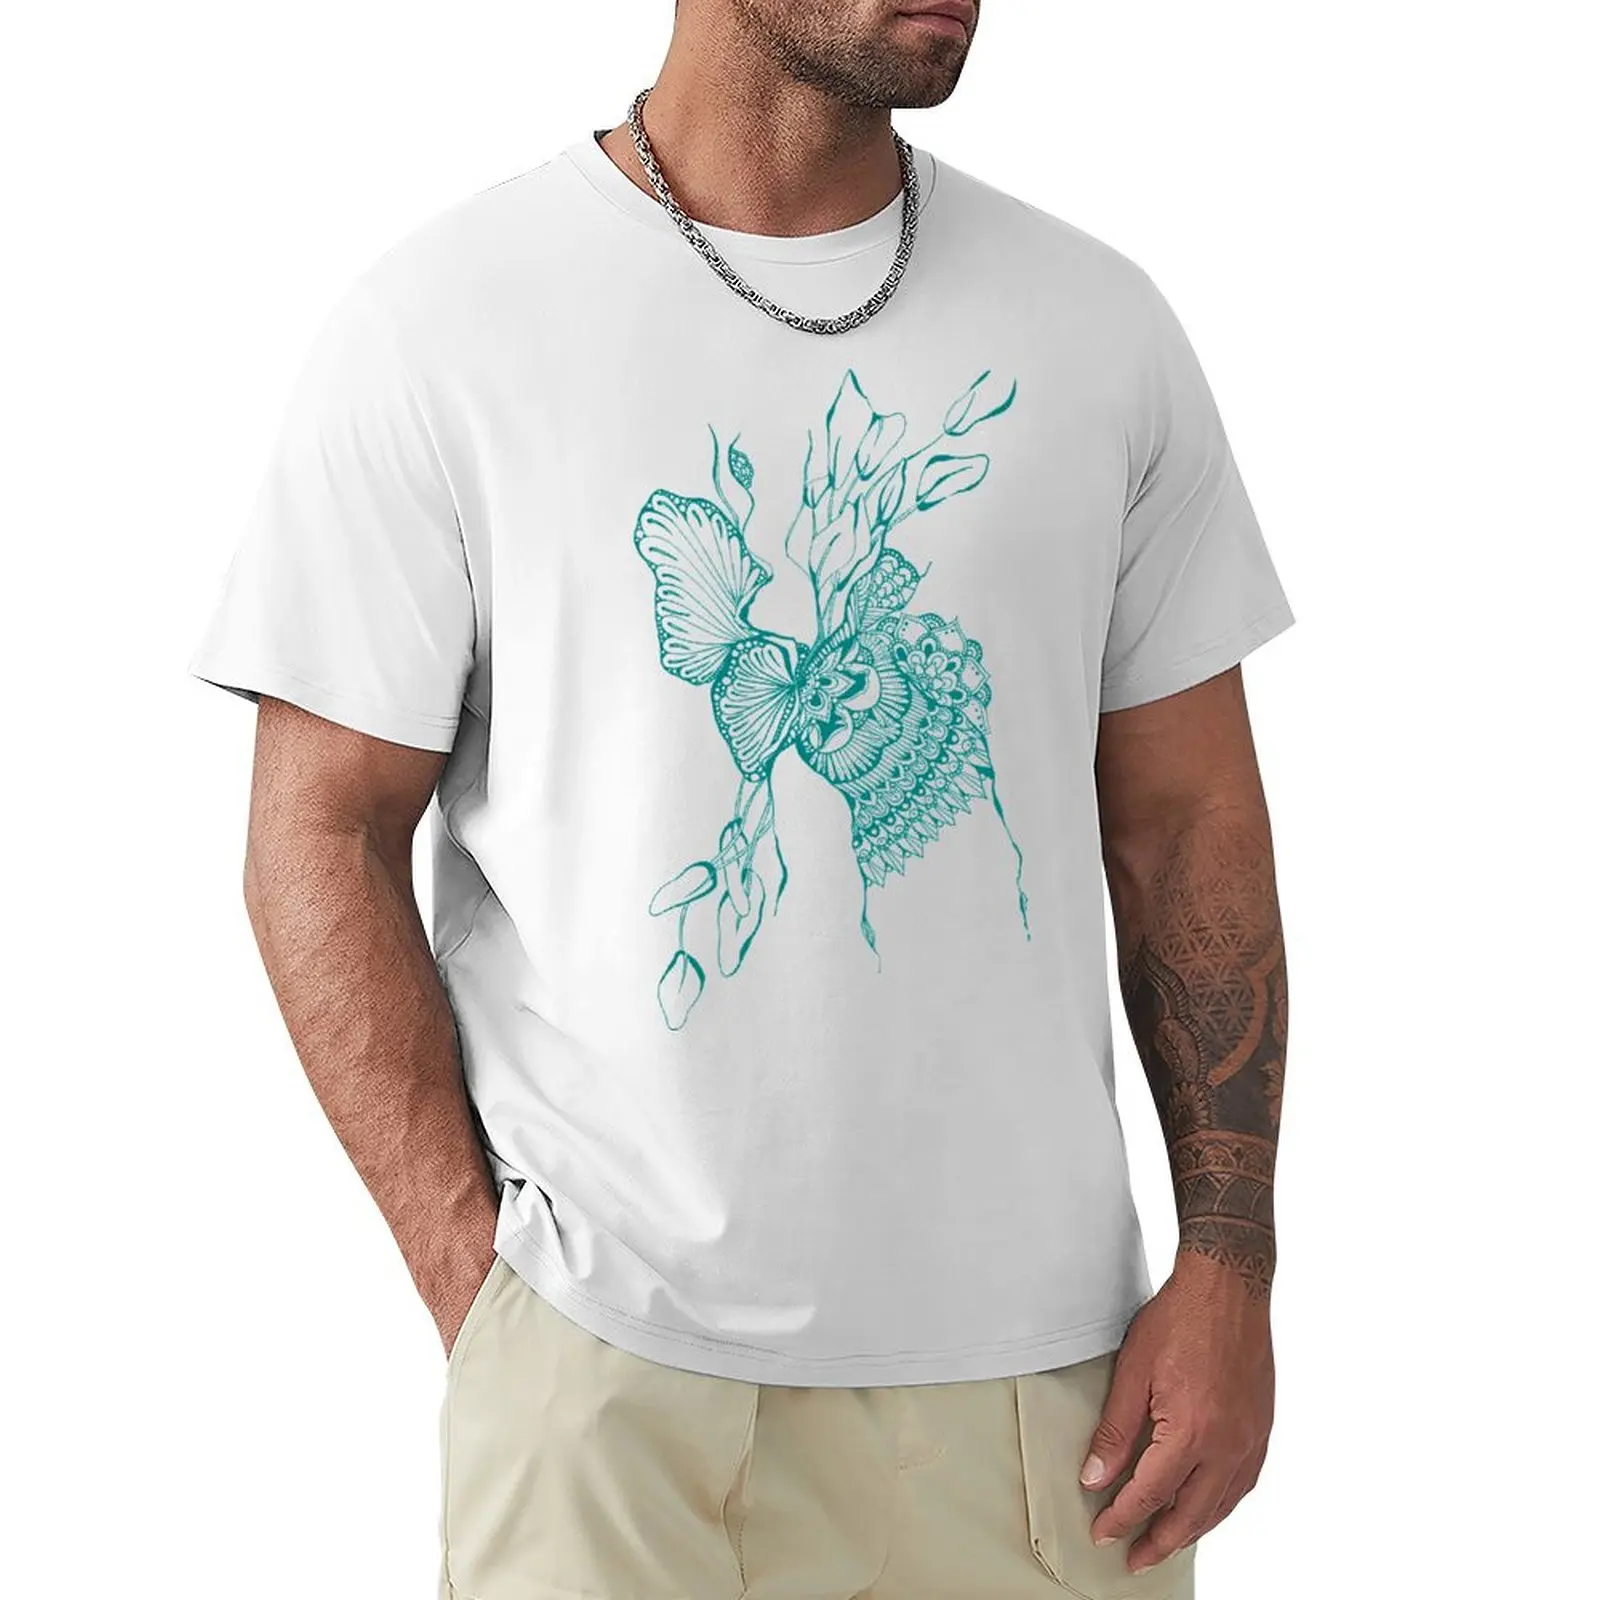 

Teal turquoise abstract line tattoo art T-shirt hippie clothes shirts graphic tees cute tops men clothings